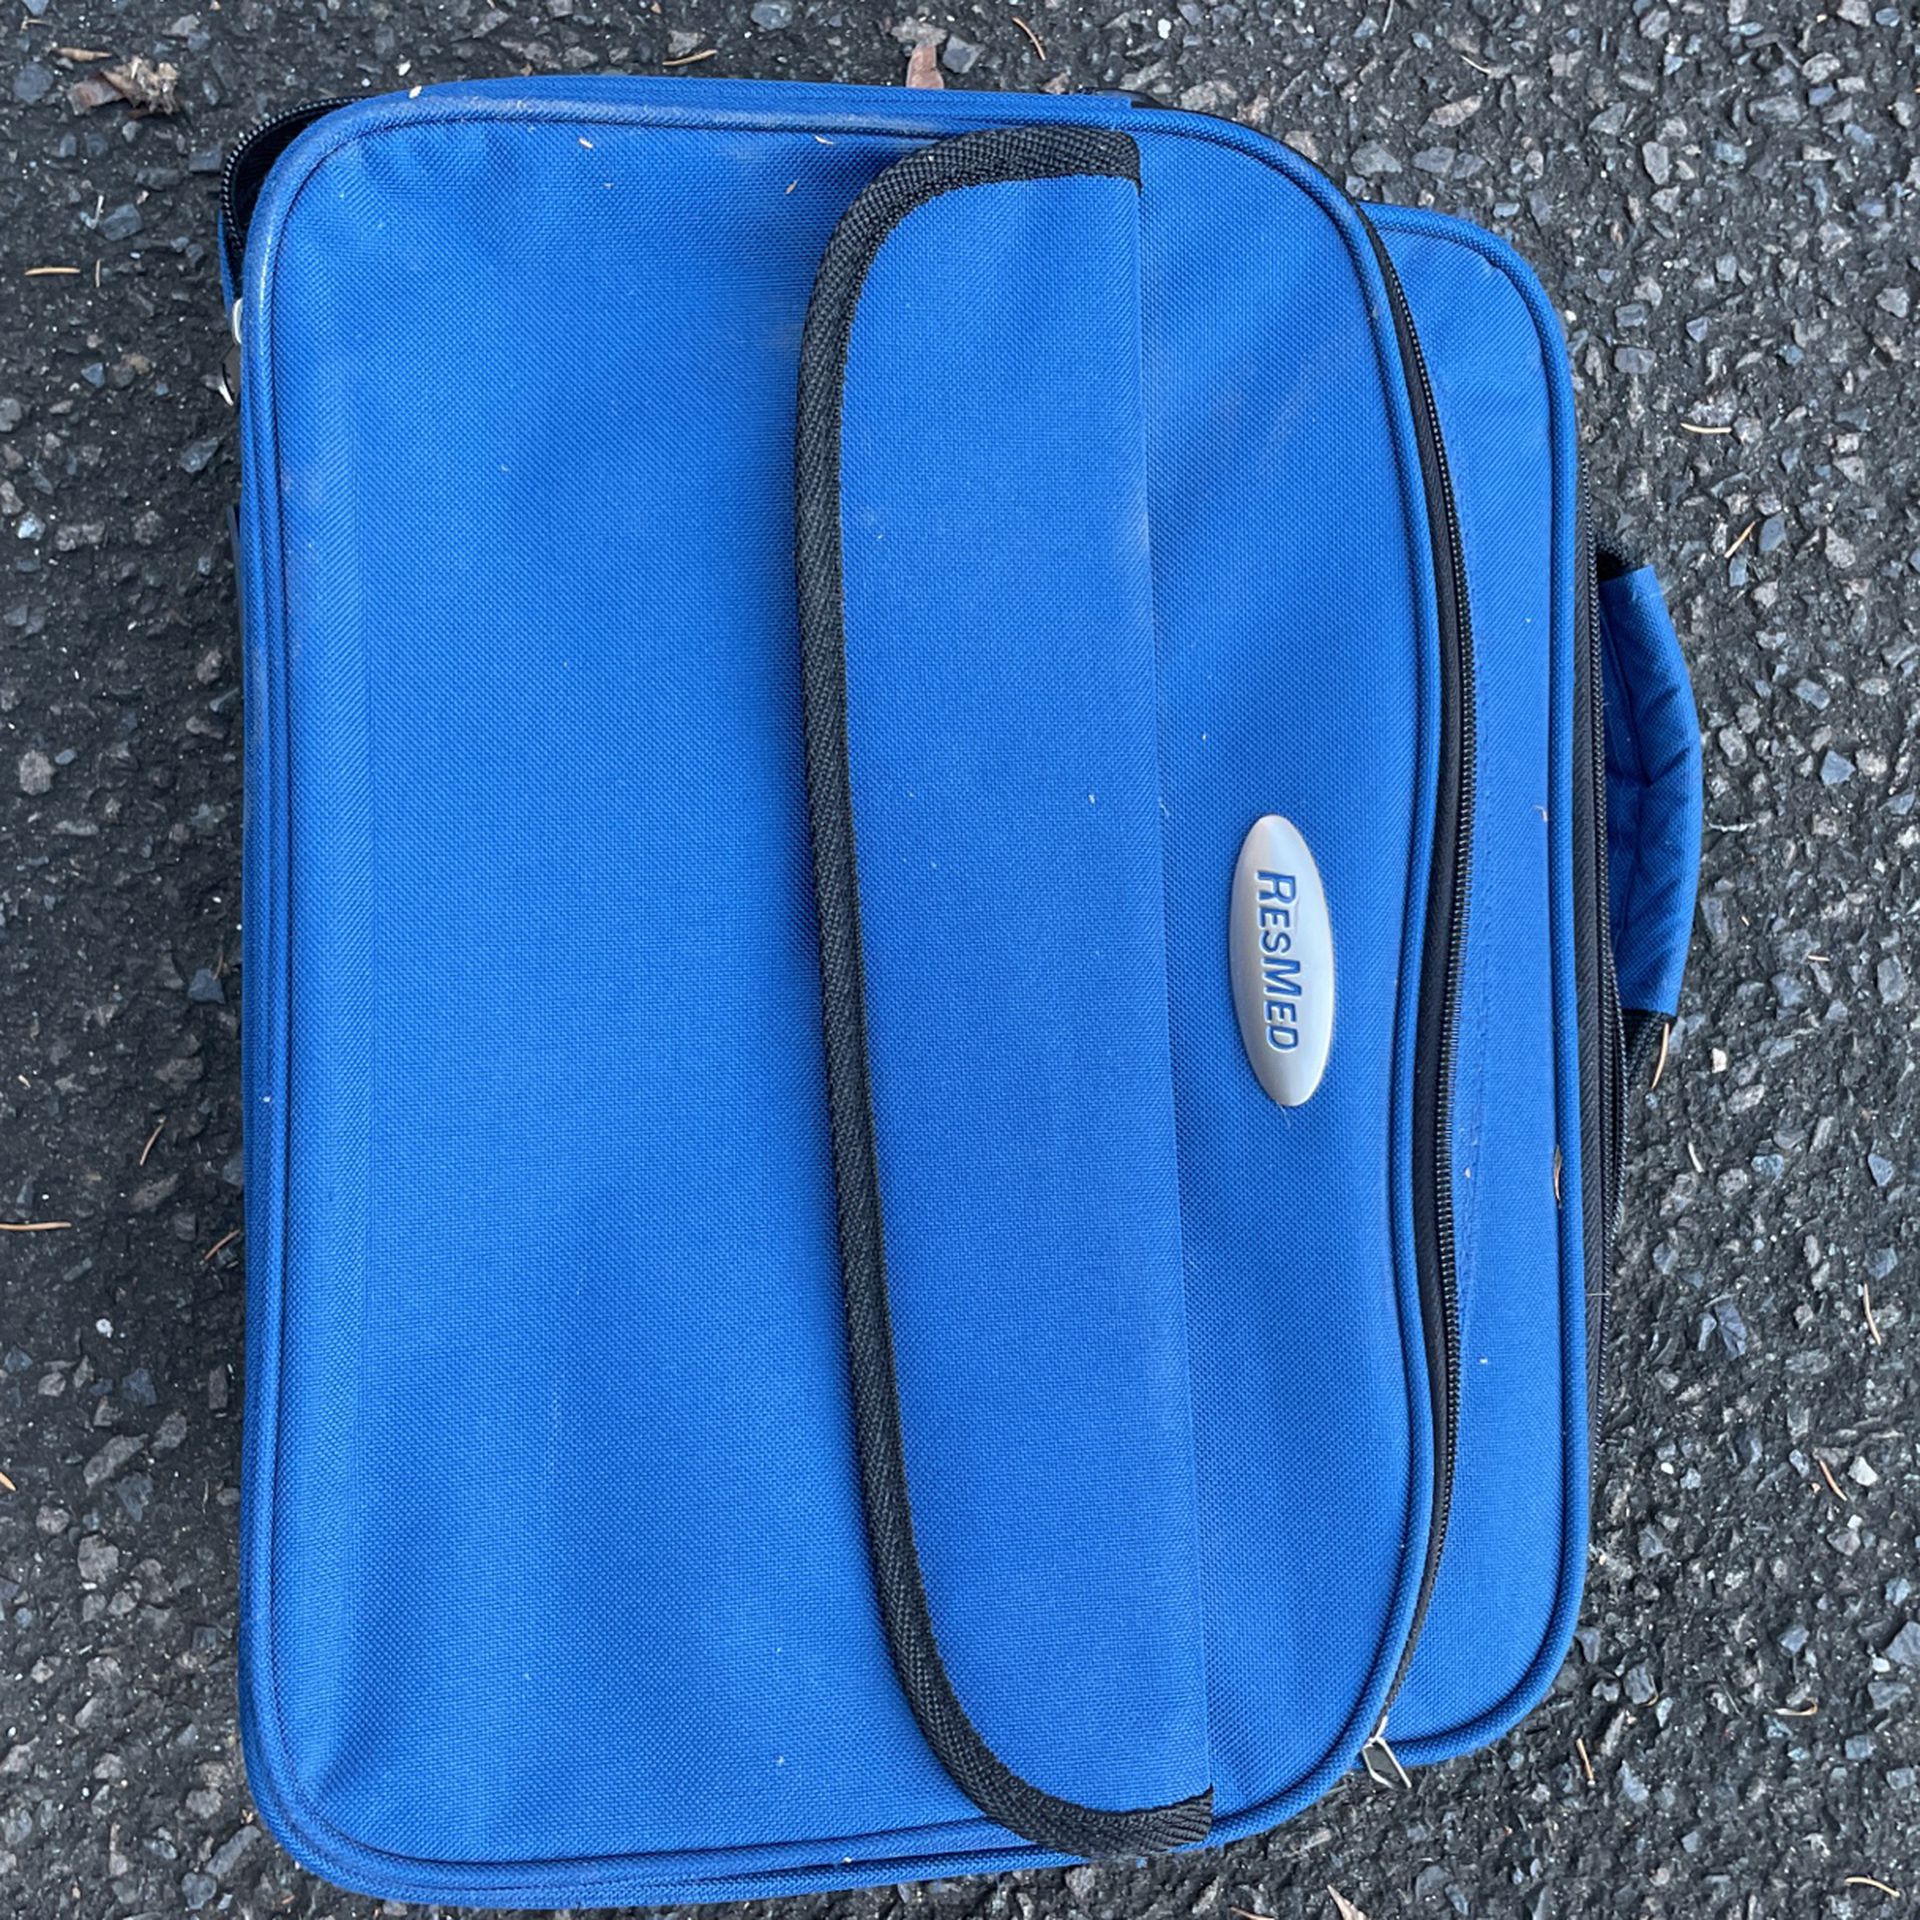 Carry case. For CPAP machine